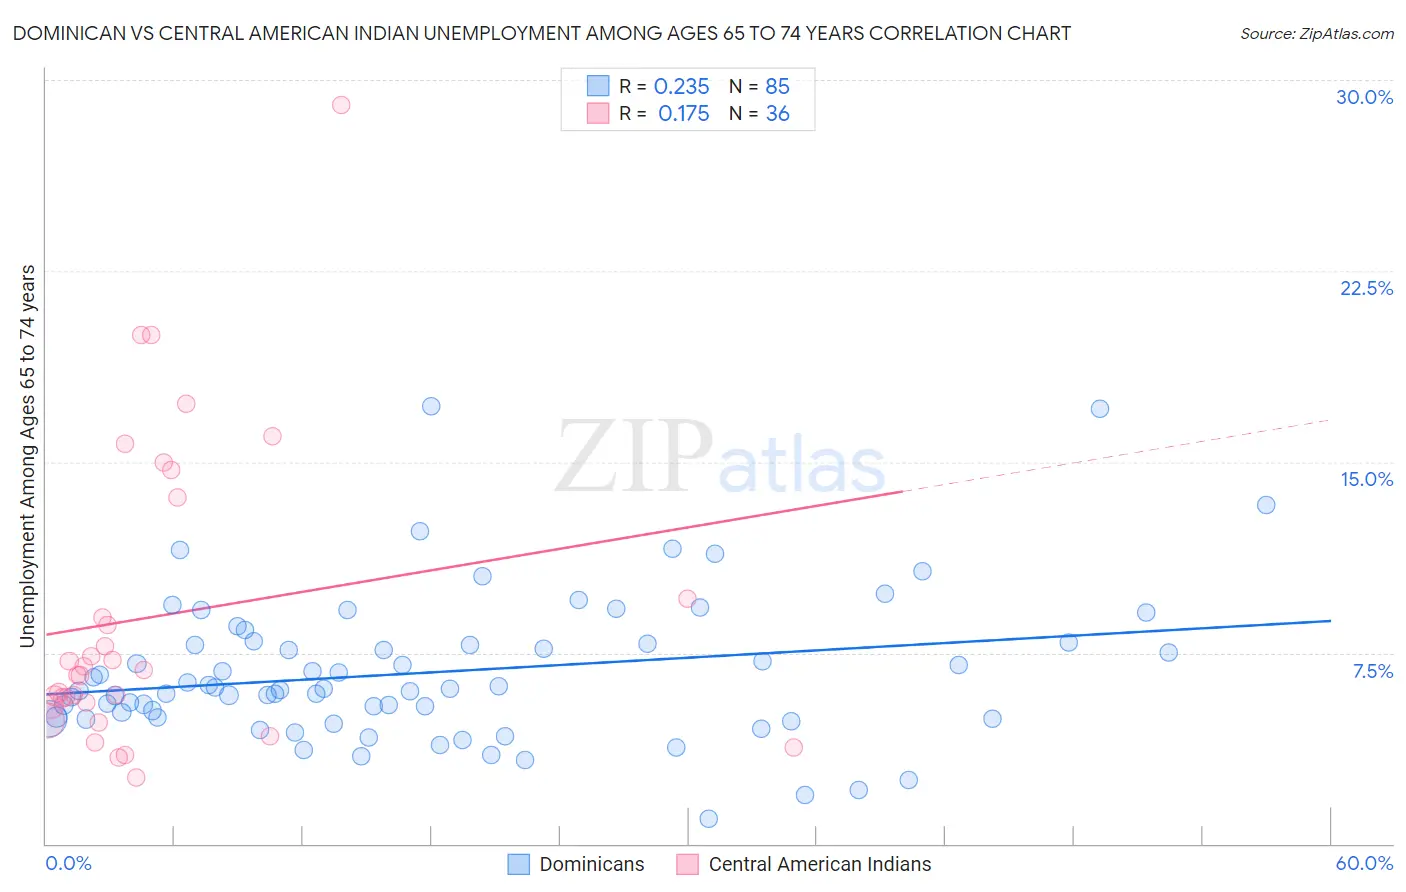 Dominican vs Central American Indian Unemployment Among Ages 65 to 74 years